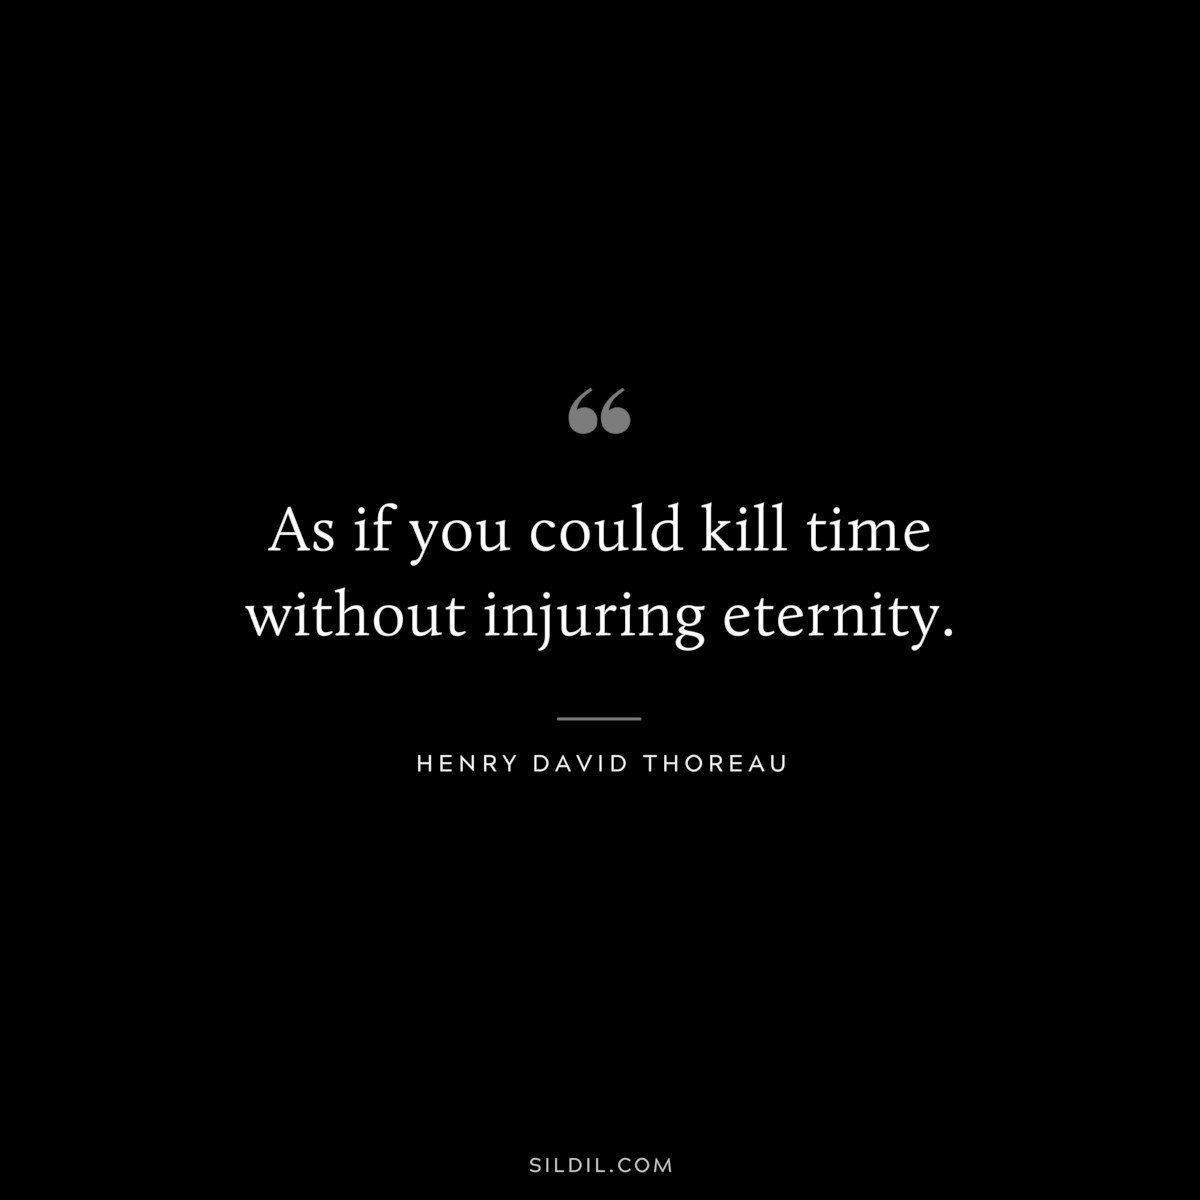 As if you could kill time without injuring eternity. — Henry David Thoreau